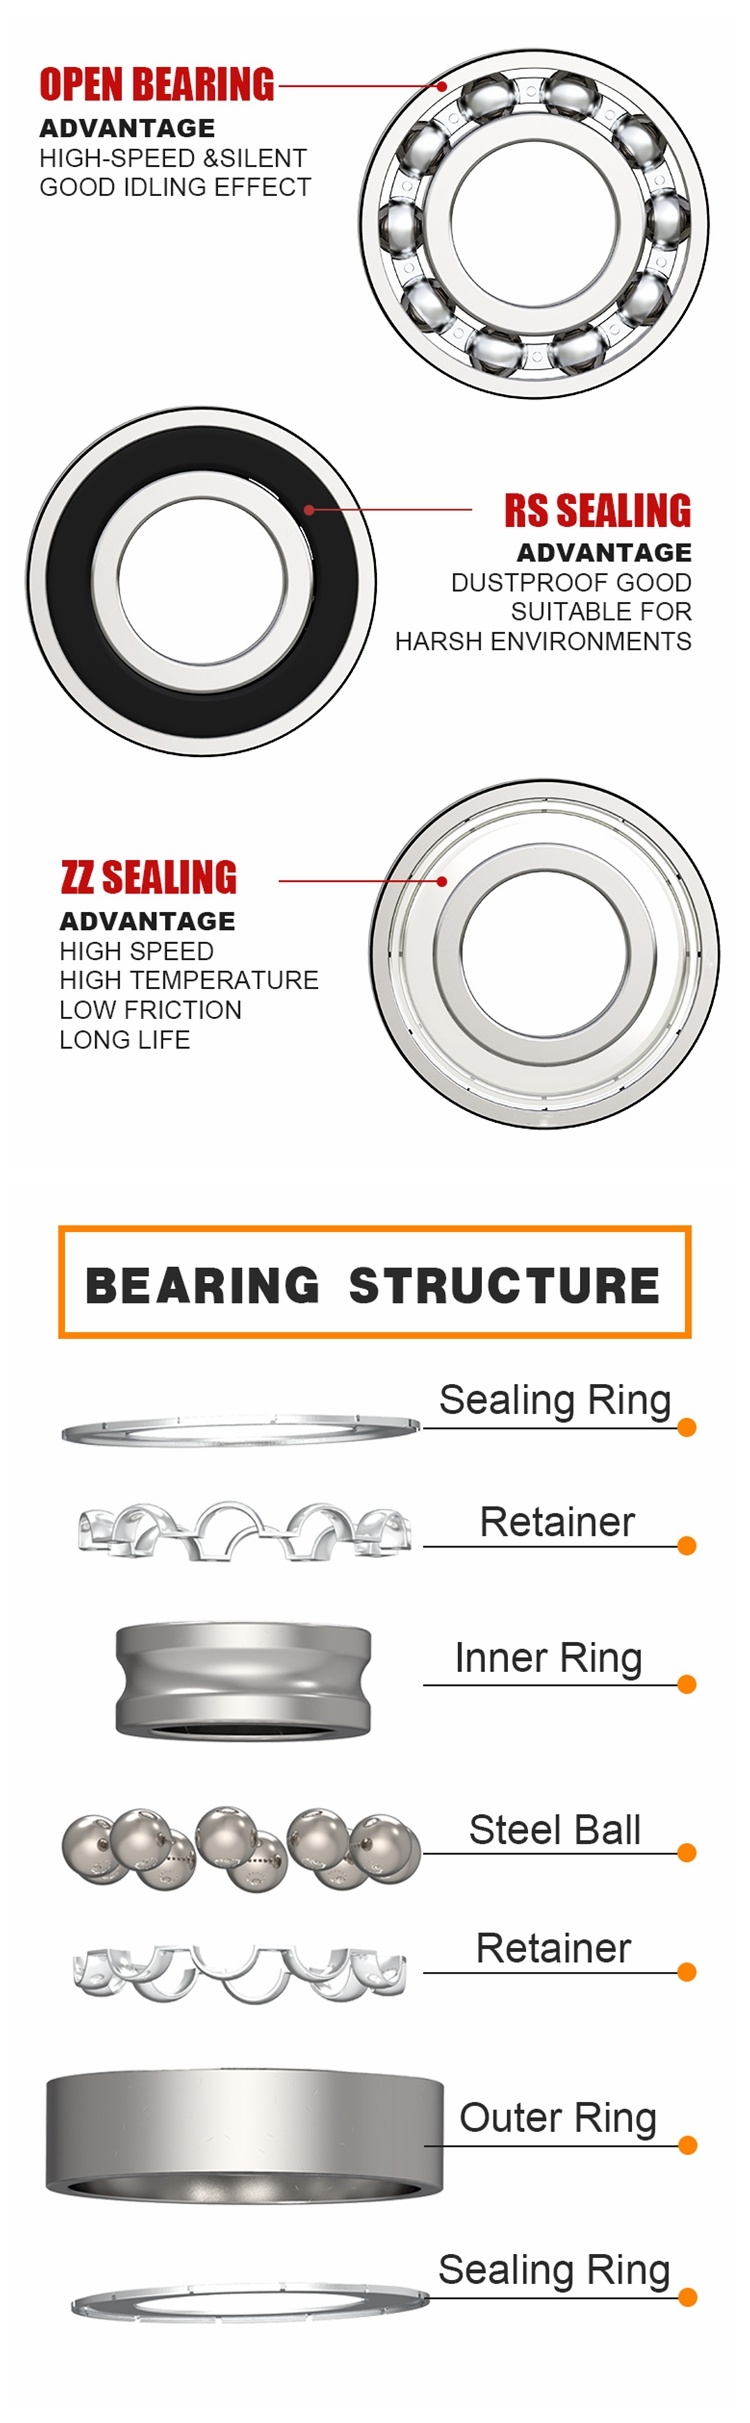 Low Noise Agriculture Bearing Steel Cover 619/500 RS Deep Groove Ball Bearings